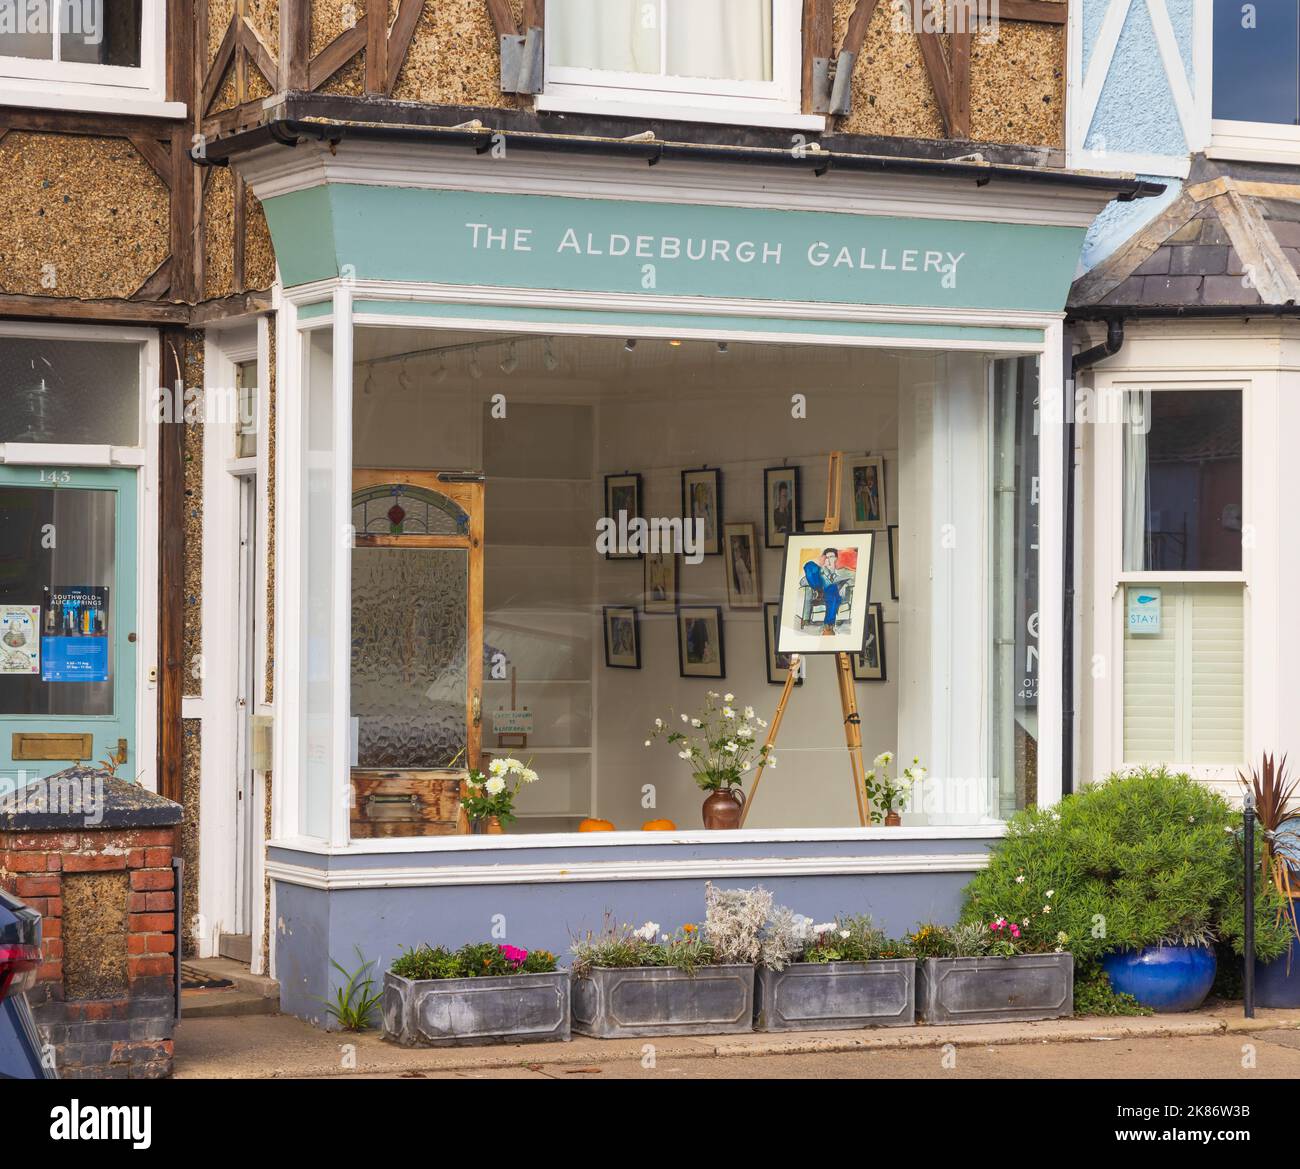 The Aldeburgh Gallery in the high street. Stock Photo